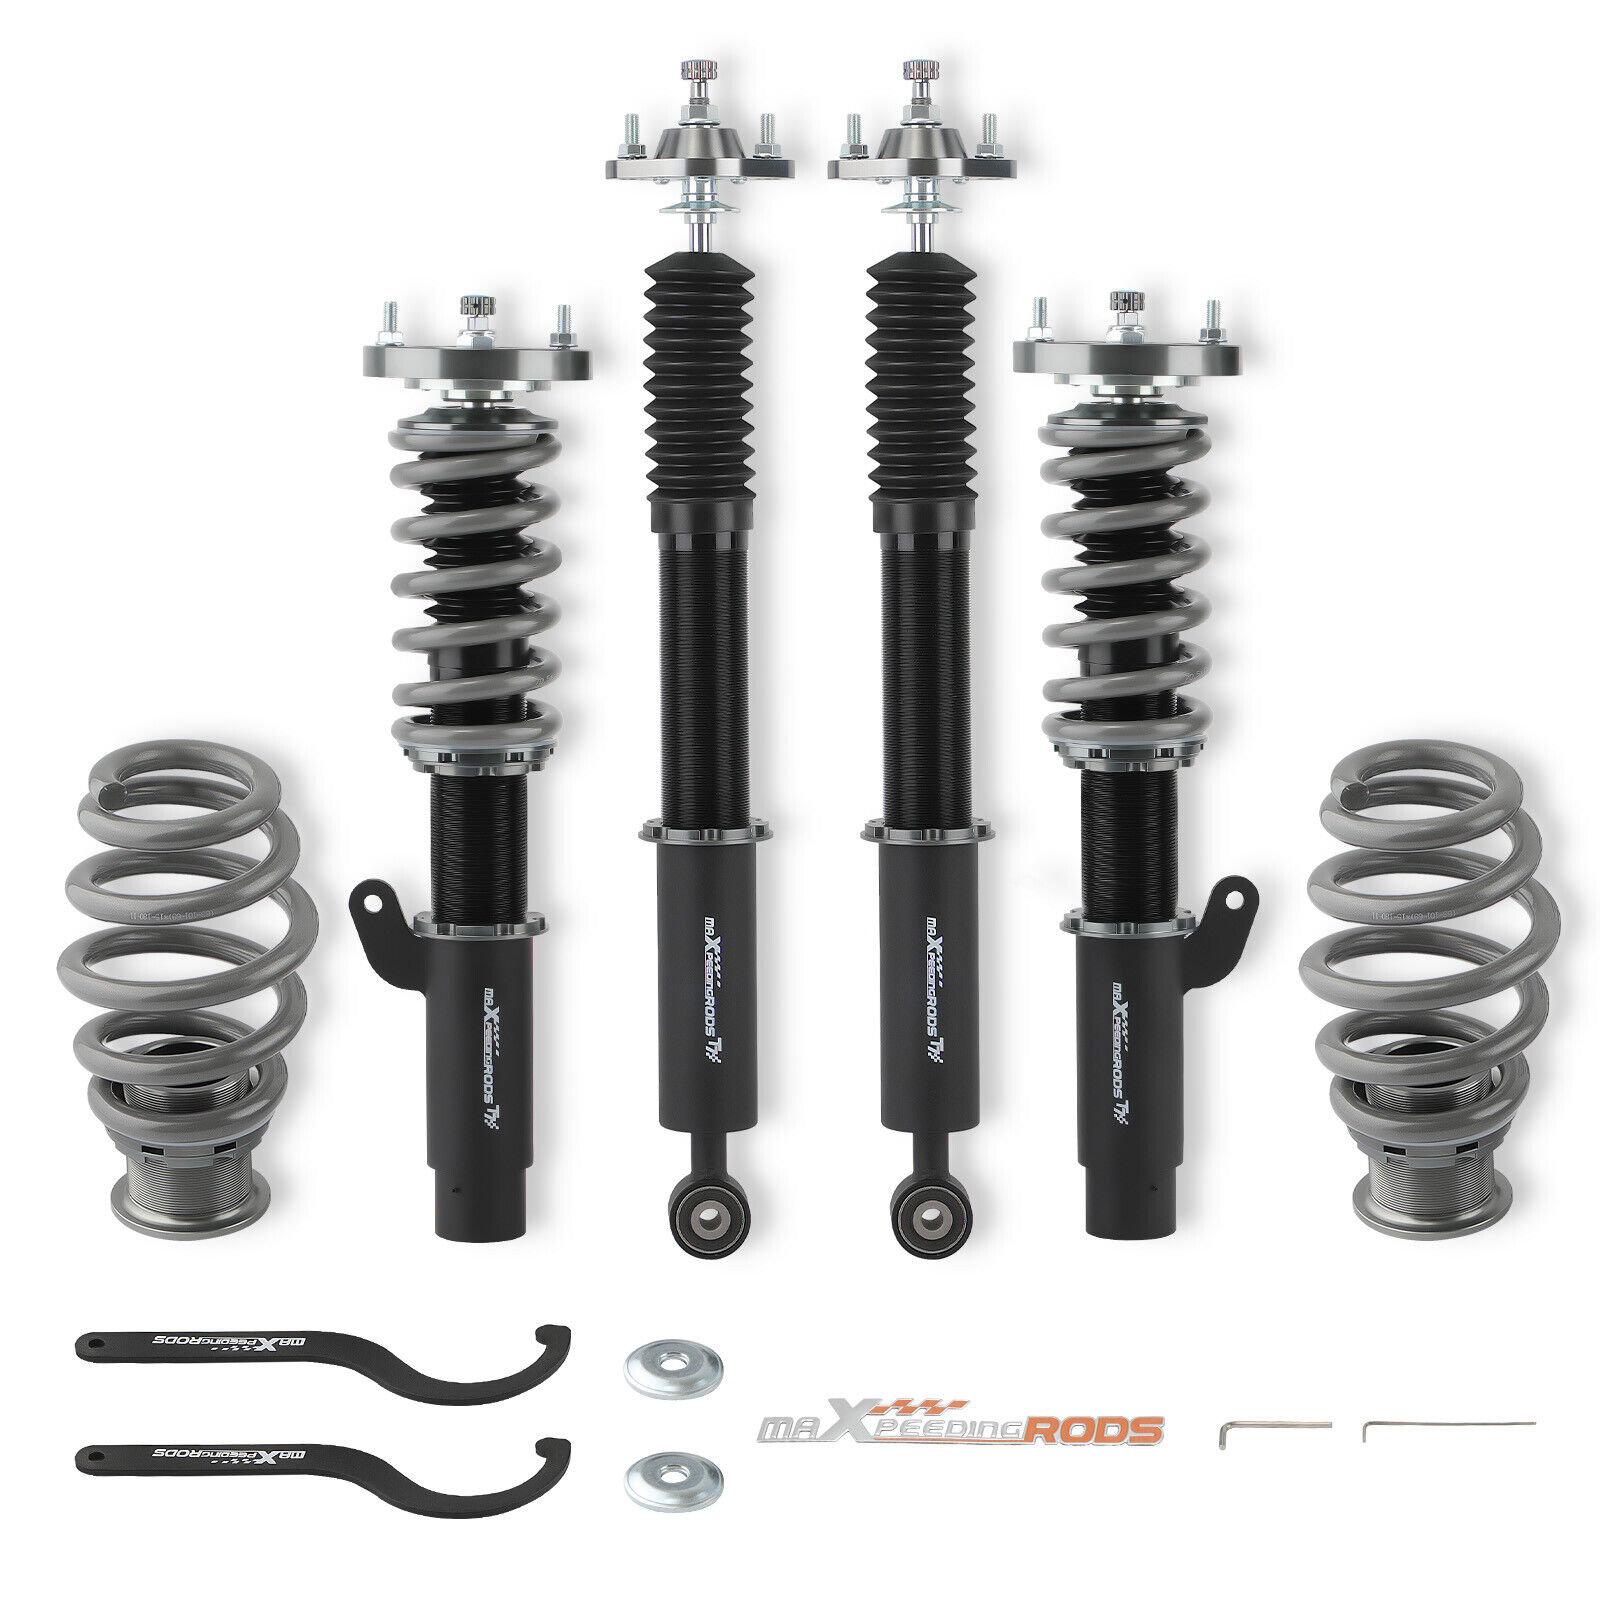 Maxpeedingrods COT7 Coilovers Suspension Kit For BMW E46 3 Series RWD 98-05